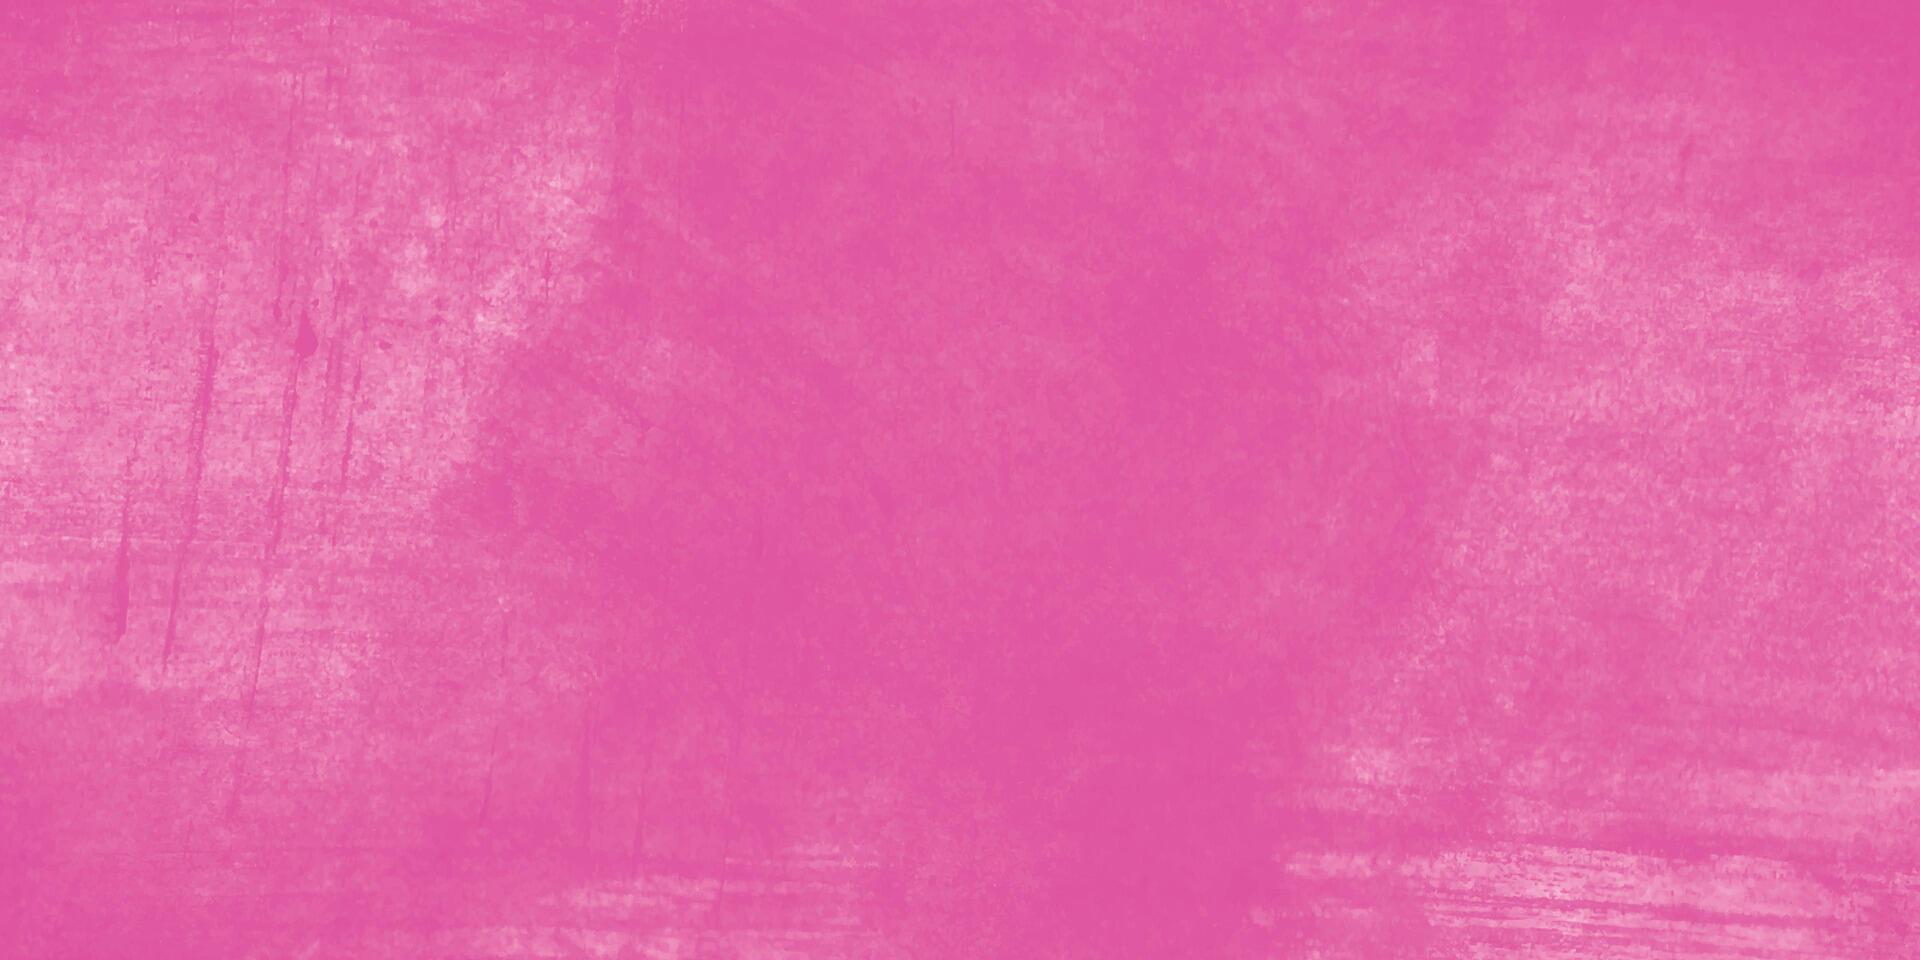 Pink background with watercolor. Pink painted grunge vector